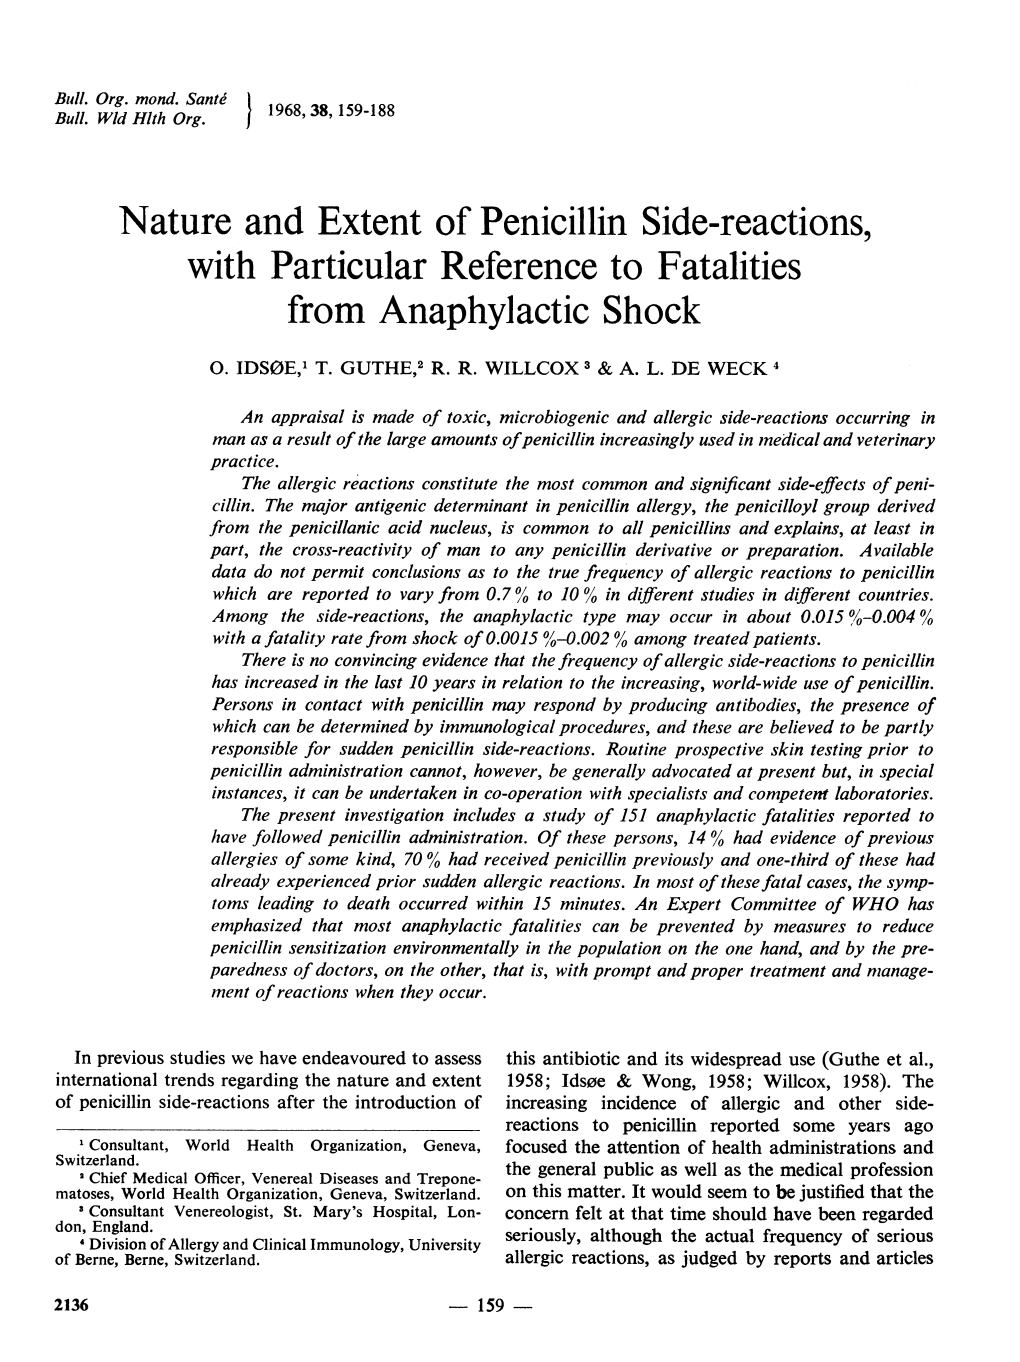 Nature and Extent of Penicillin Side-Reactions, with Particular Reference to Fatalities from Anaphylactic Shock